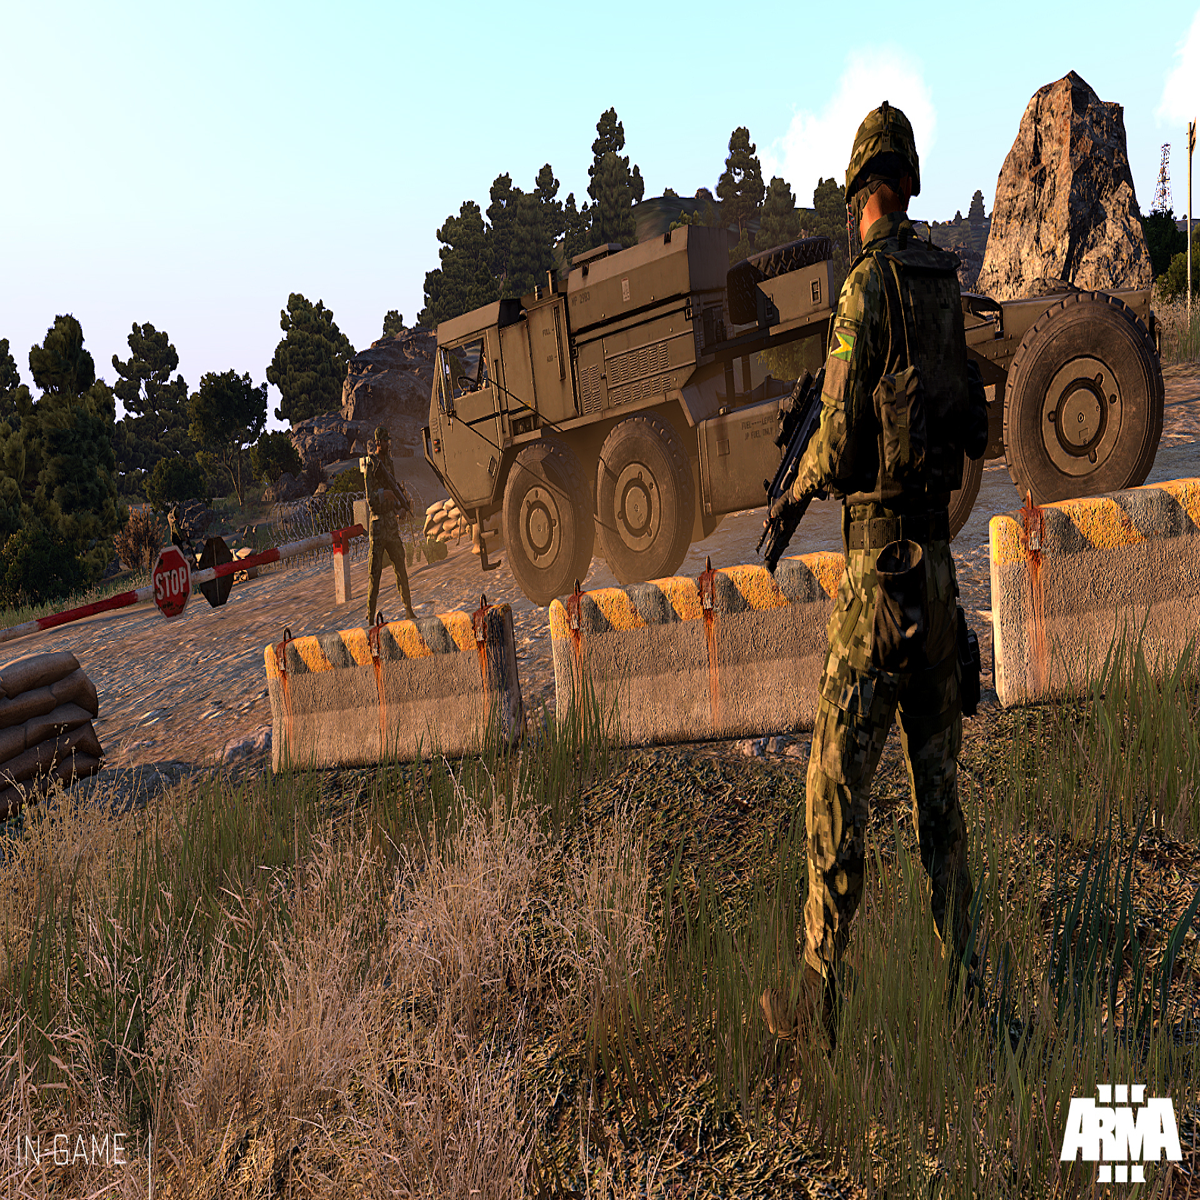 Arma Reforger Announced For PC And Xbox, Launching Today - GameSpot